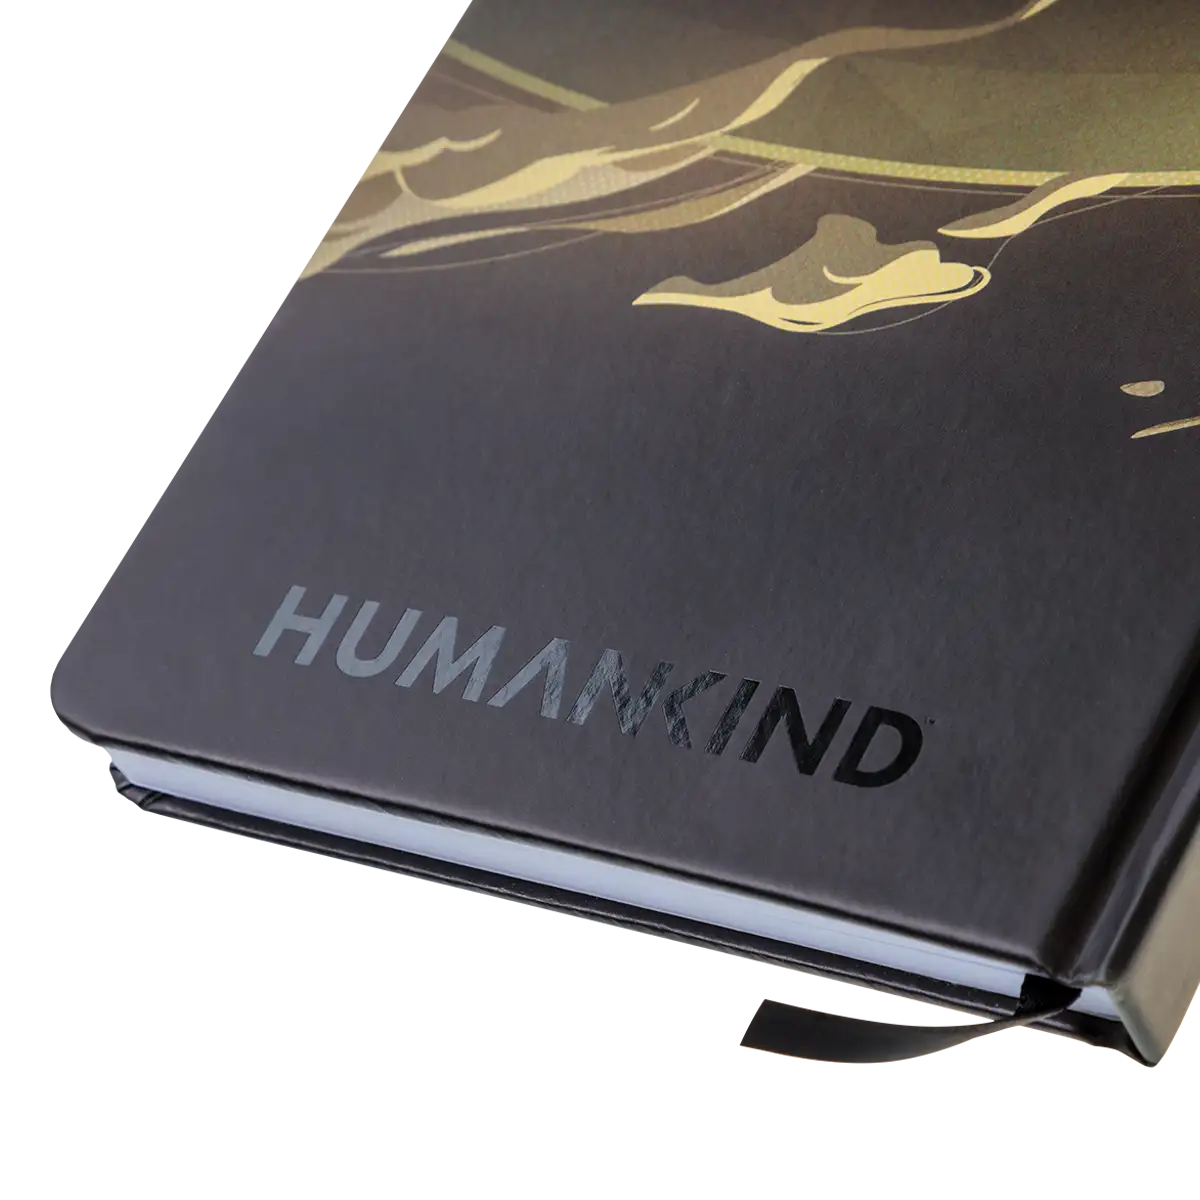 Humankind Notebook "Amplified" Image 2